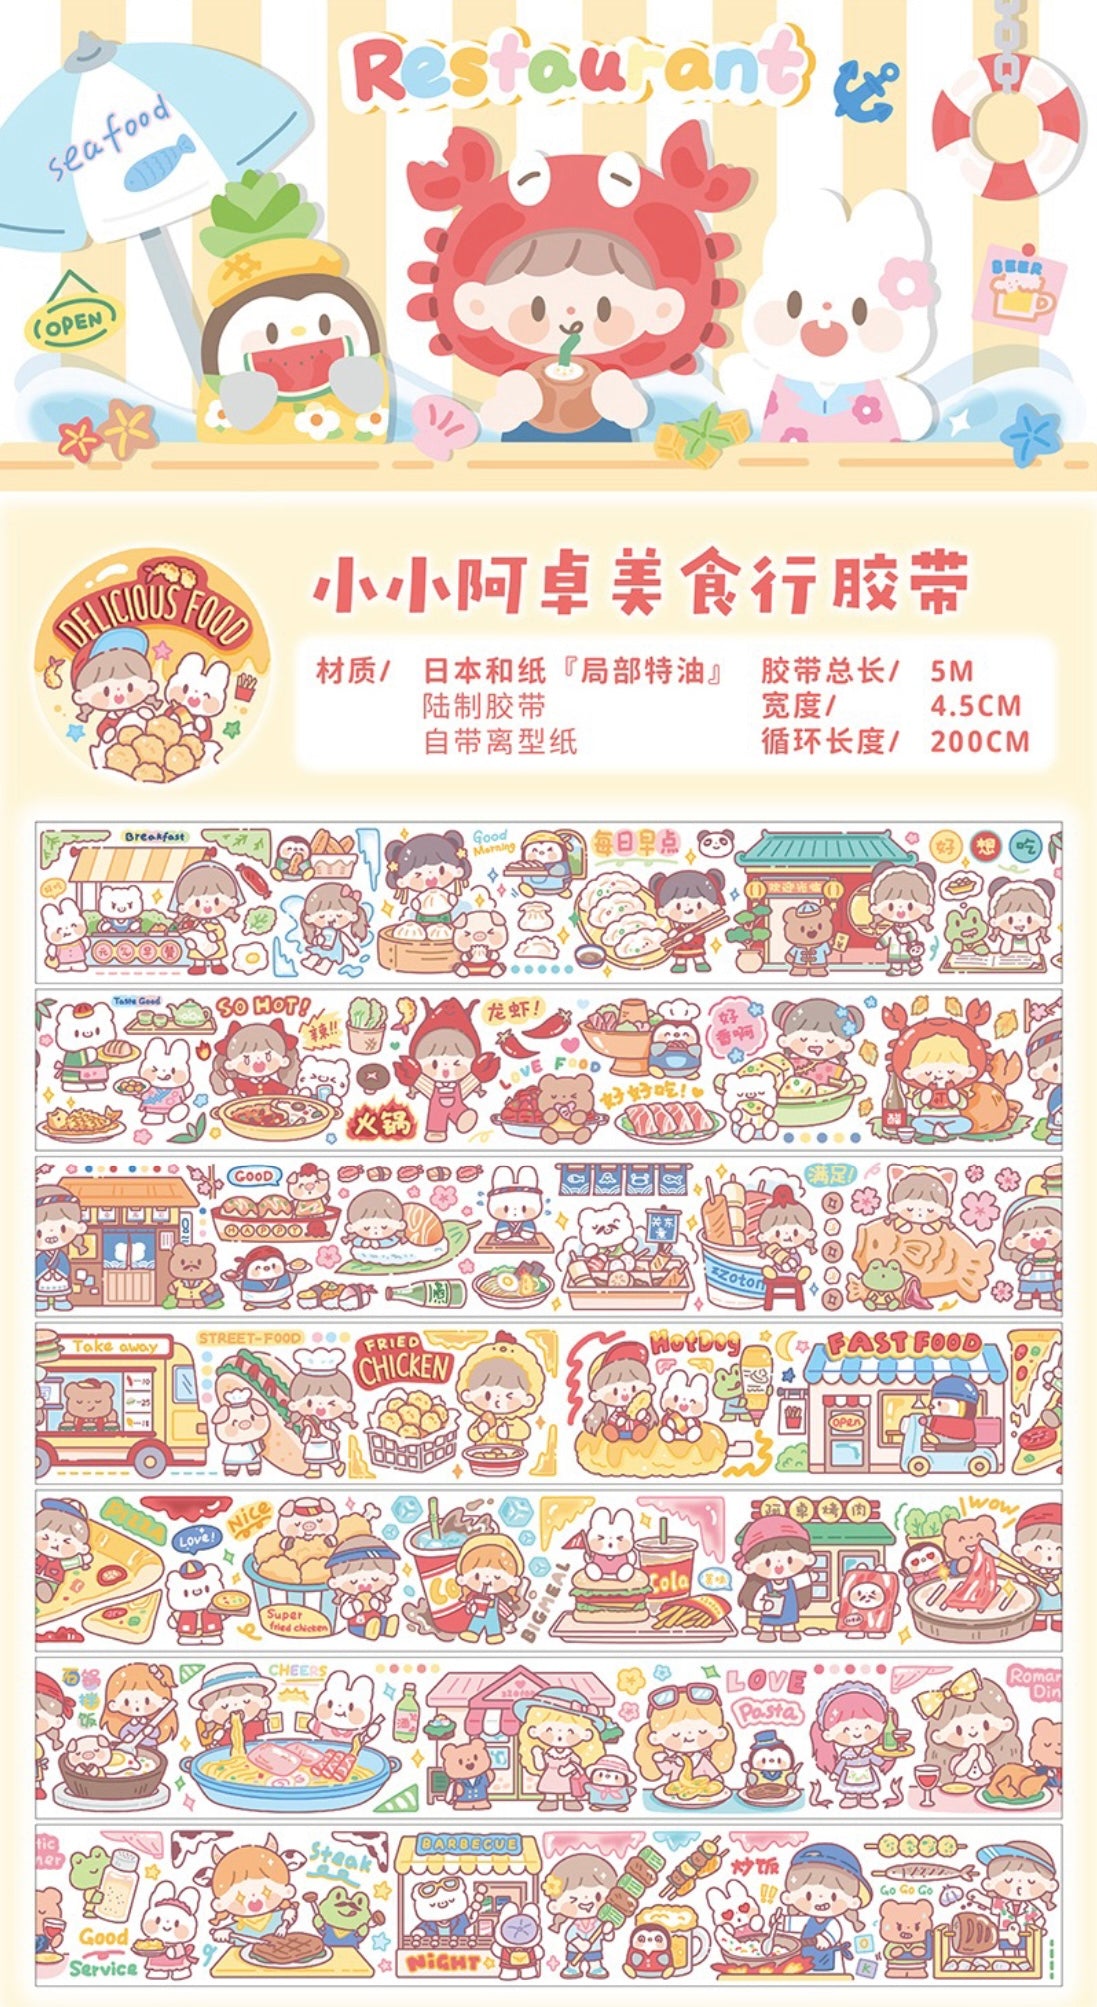 Molinta restaurant「Delicious Food」series washitape  sticker and journal paper pack